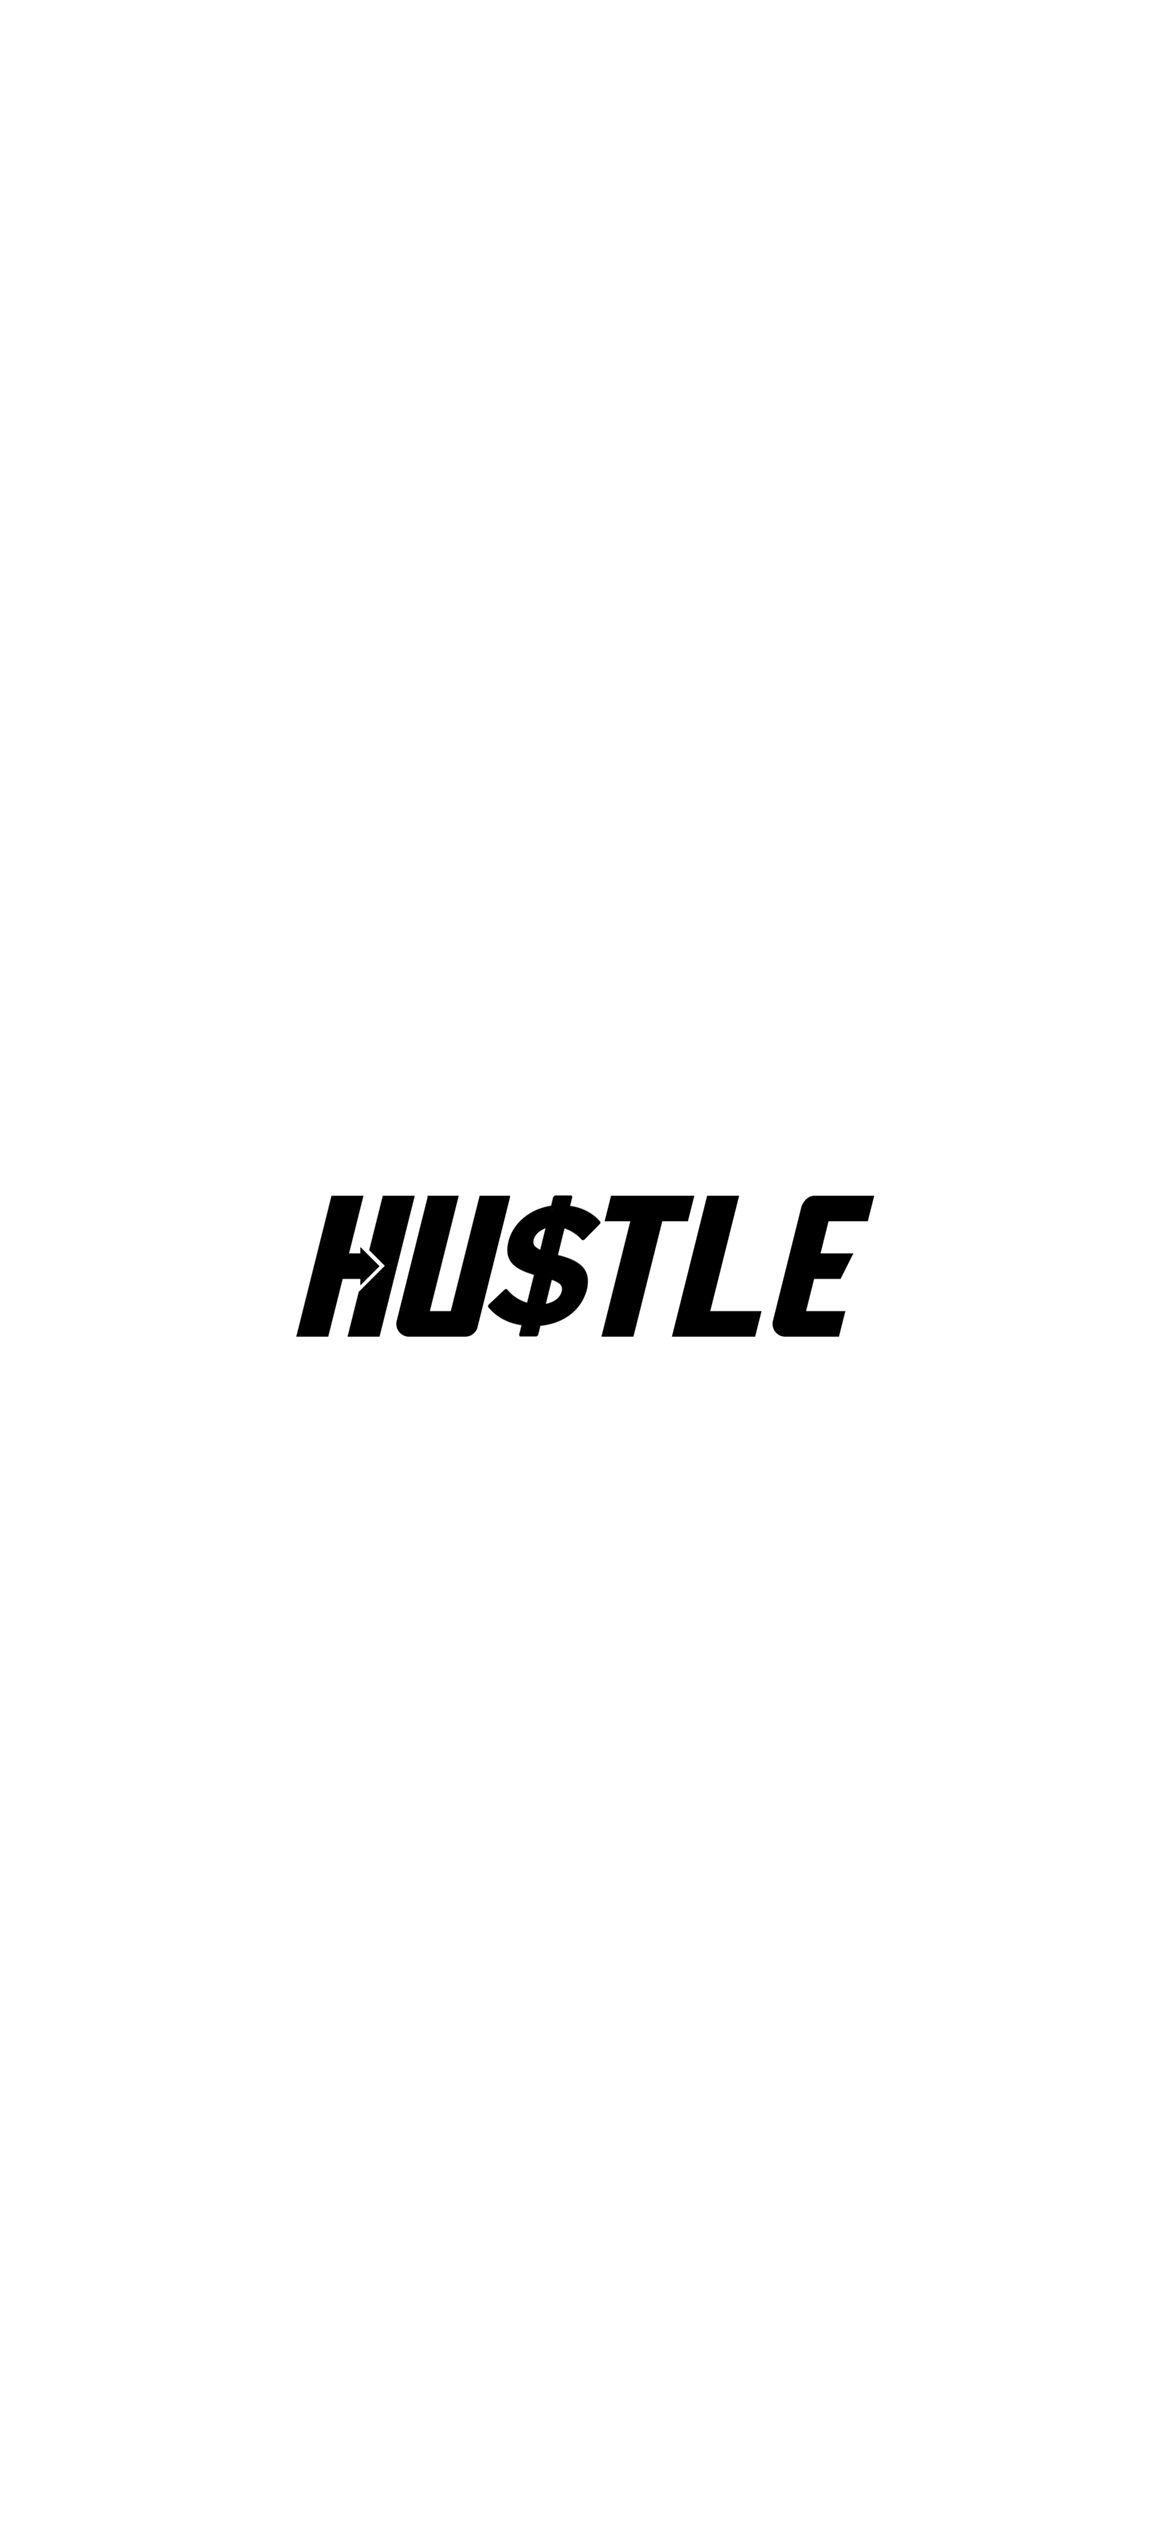 I hustle A wallpaper I made to keep myself motivated  rwallpapers